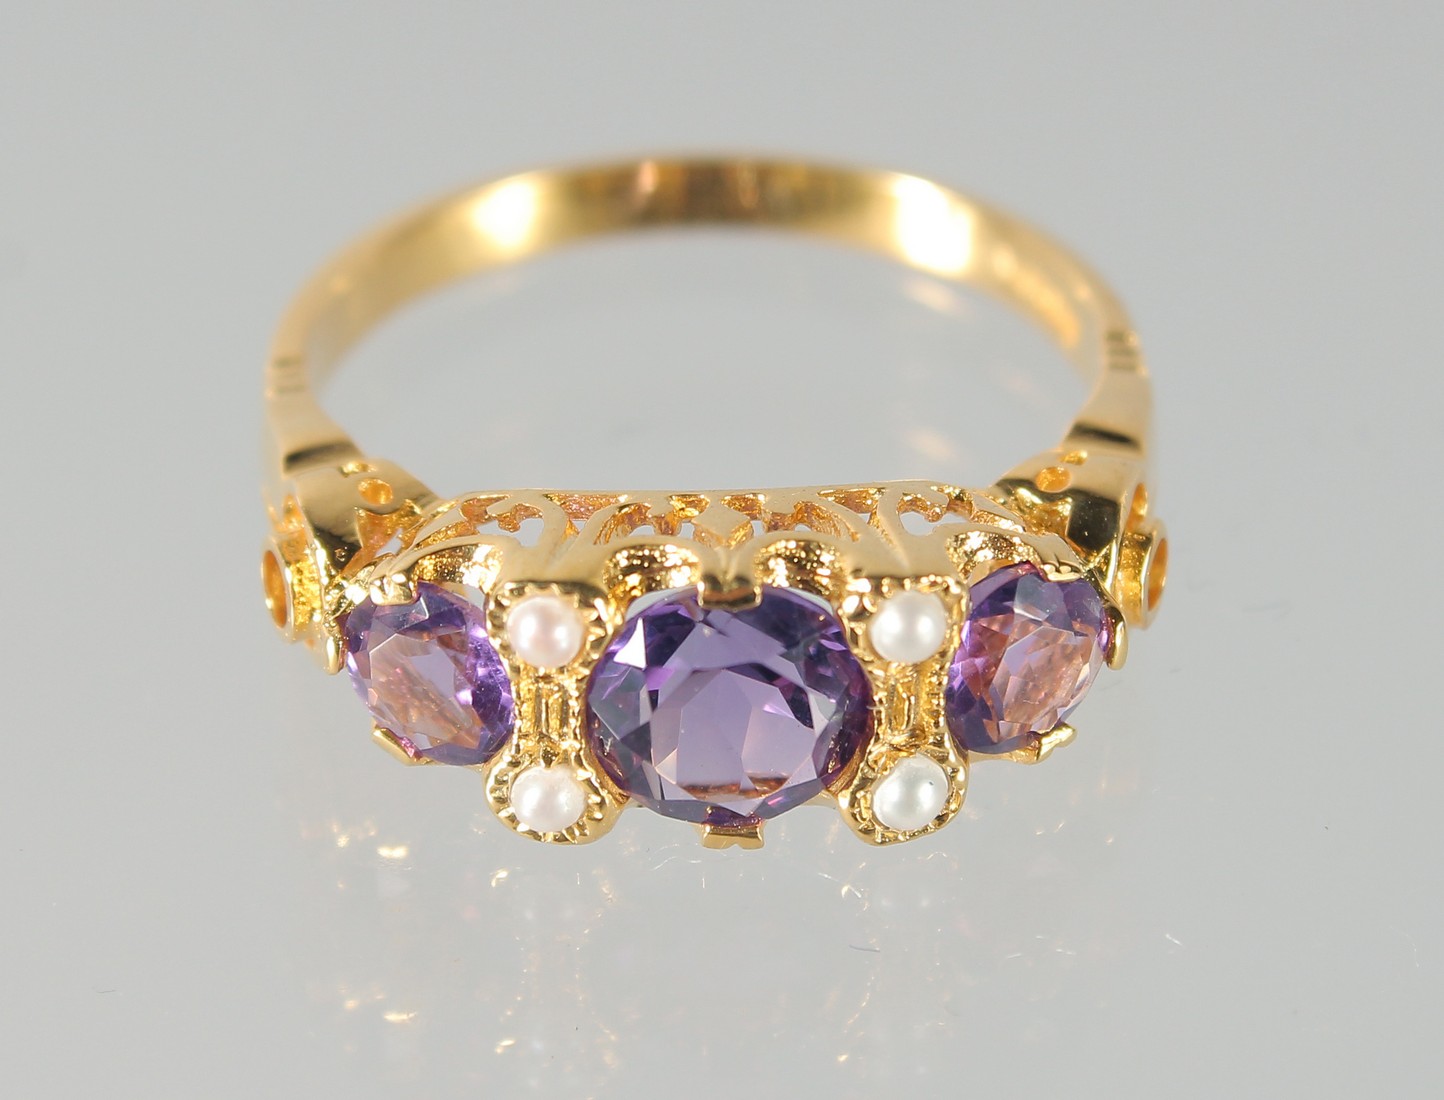 A SILVER AND GOLD-PLATED AMETHYST AND PEARL RING.